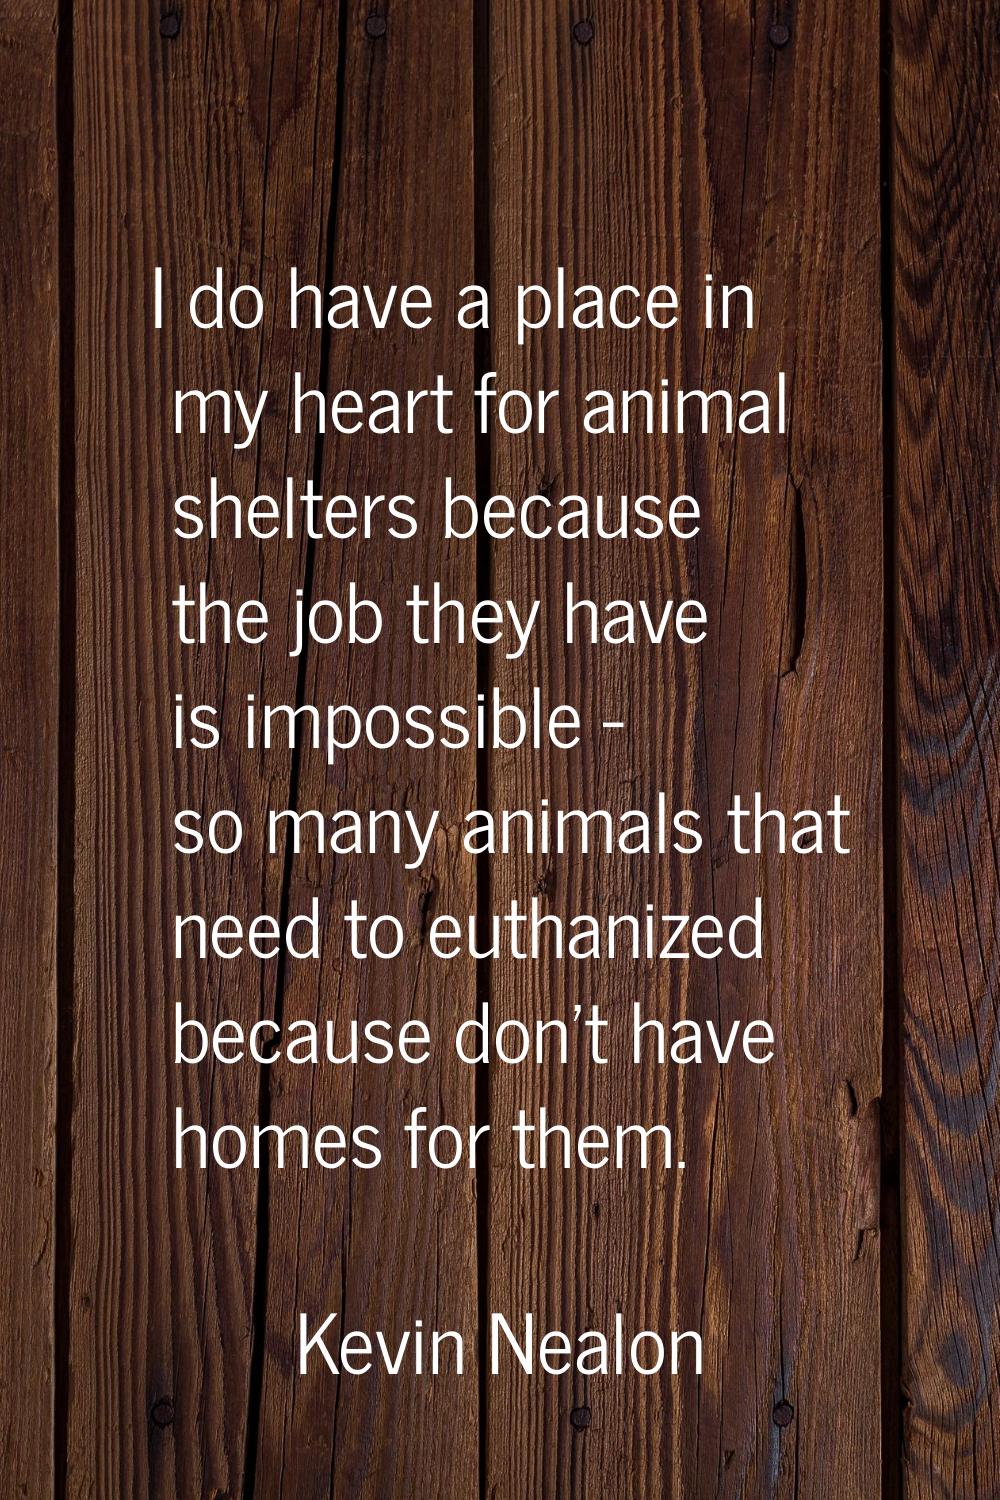 I do have a place in my heart for animal shelters because the job they have is impossible - so many